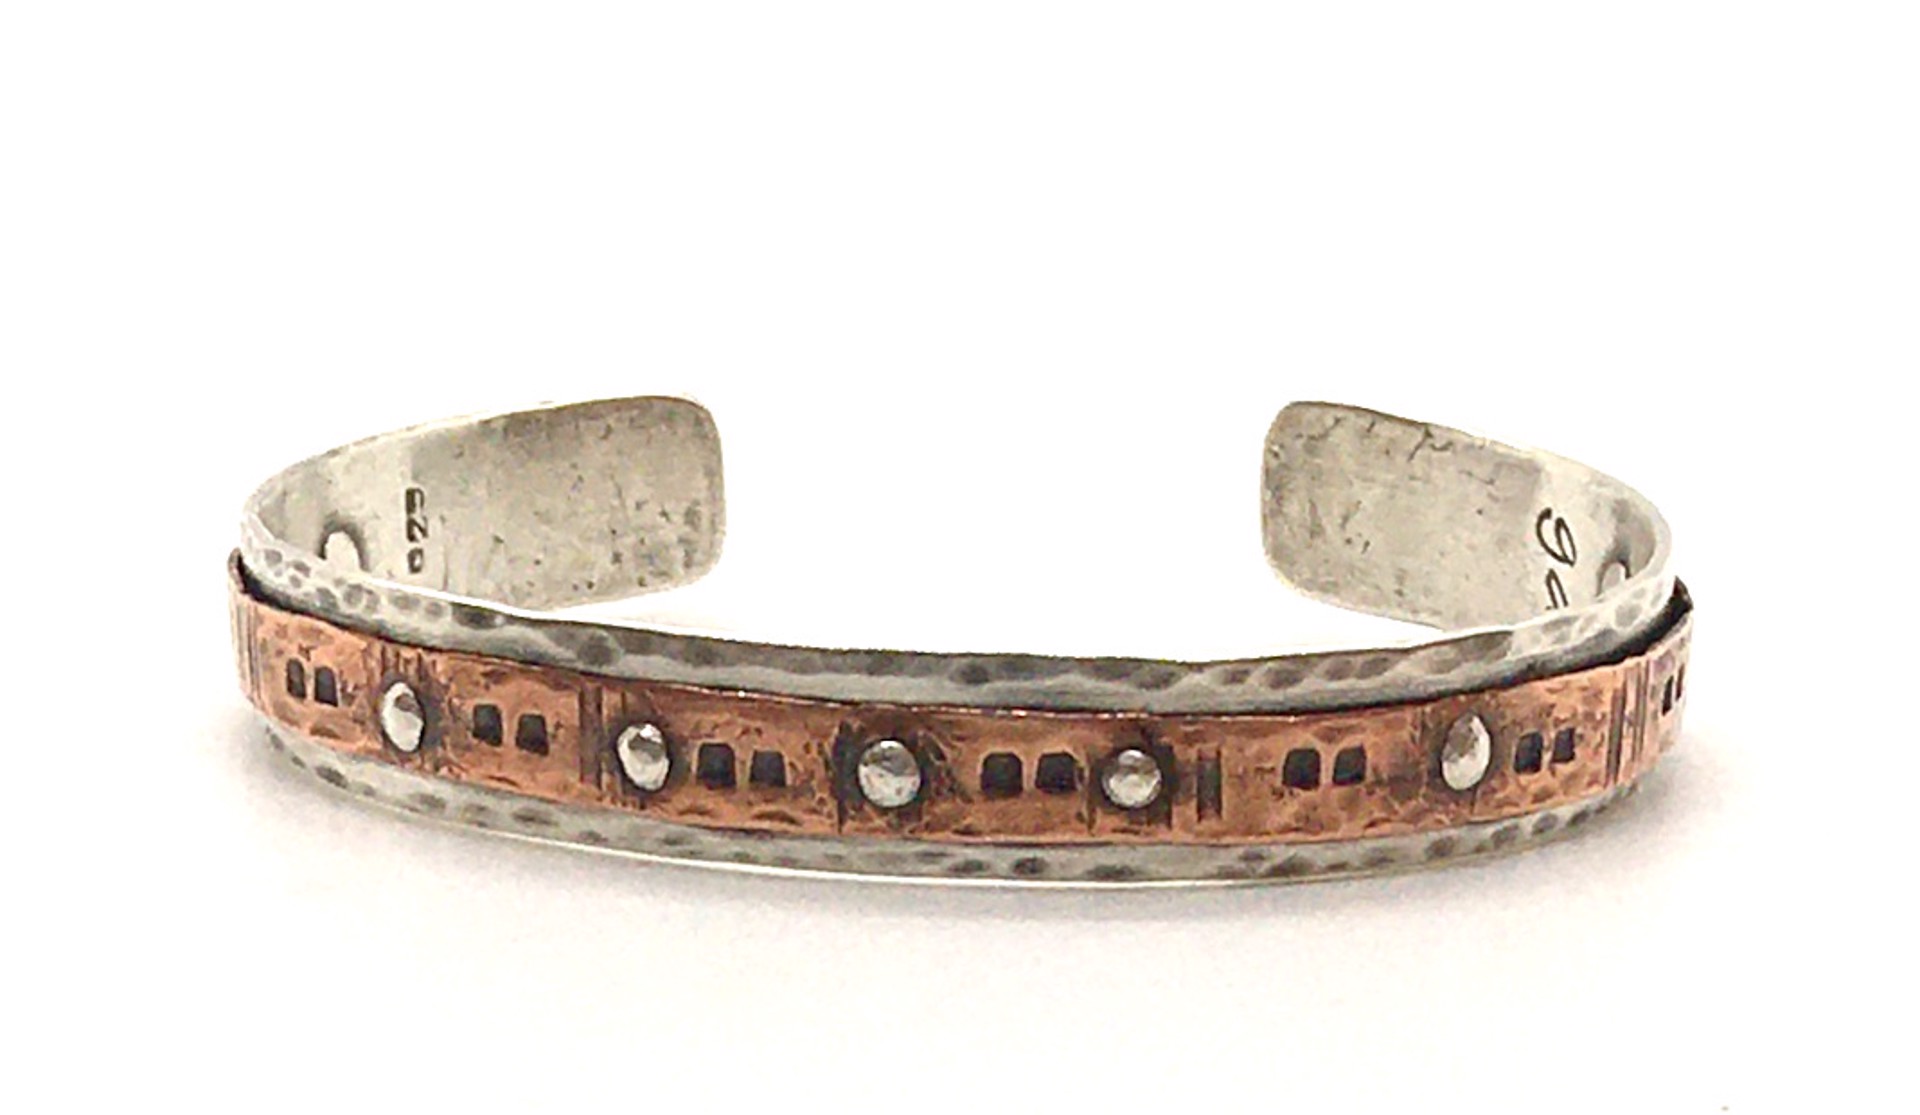 Handmade Silver and Copper Riveted Stacker Cuff - Small by Grace Ashford